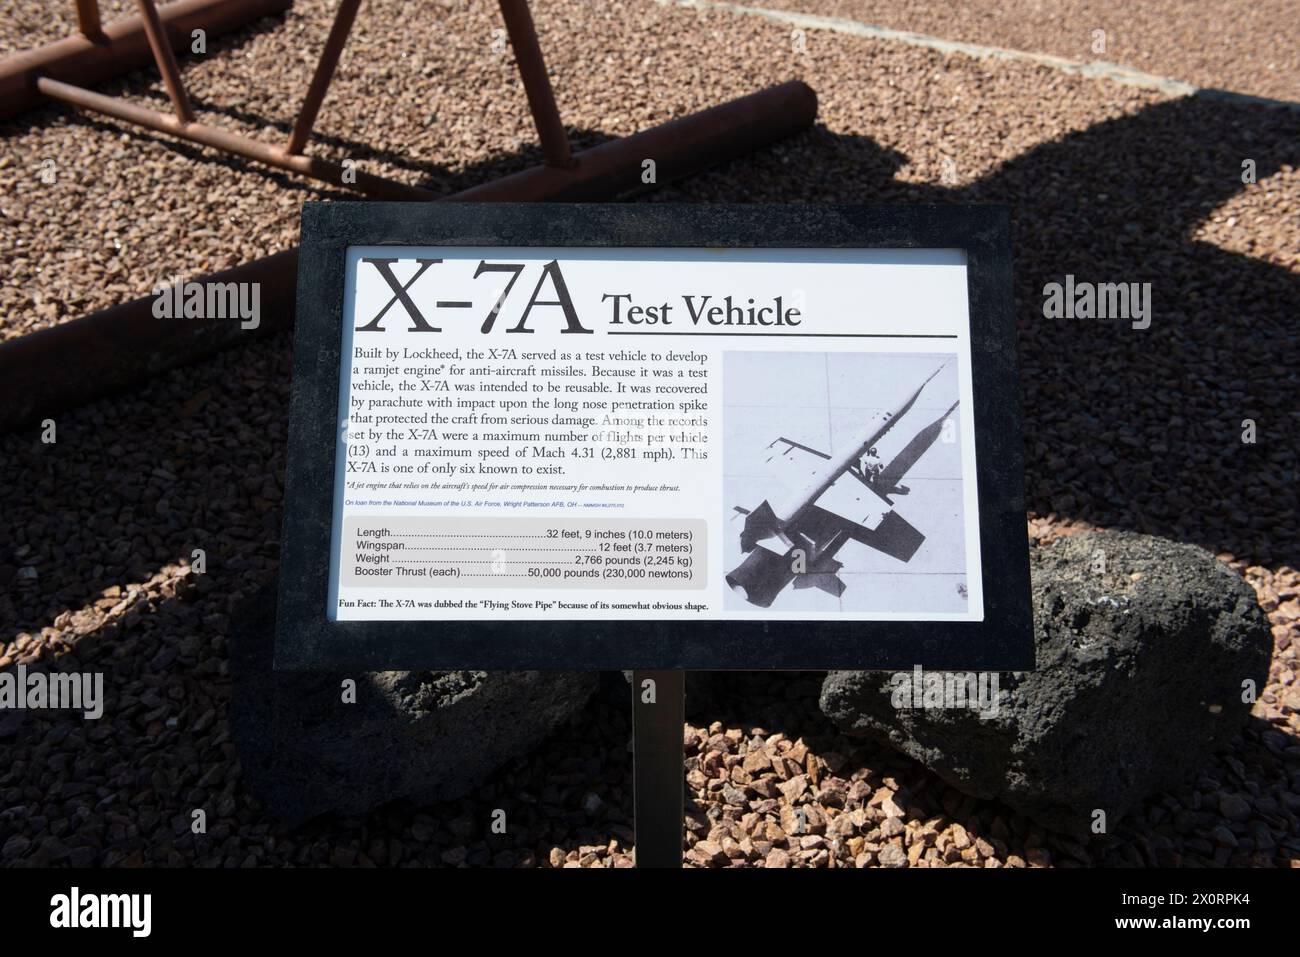 X-7A Rocket information plaque at the Museum of Space History in Alamogordo, NM, USA Stock Photo